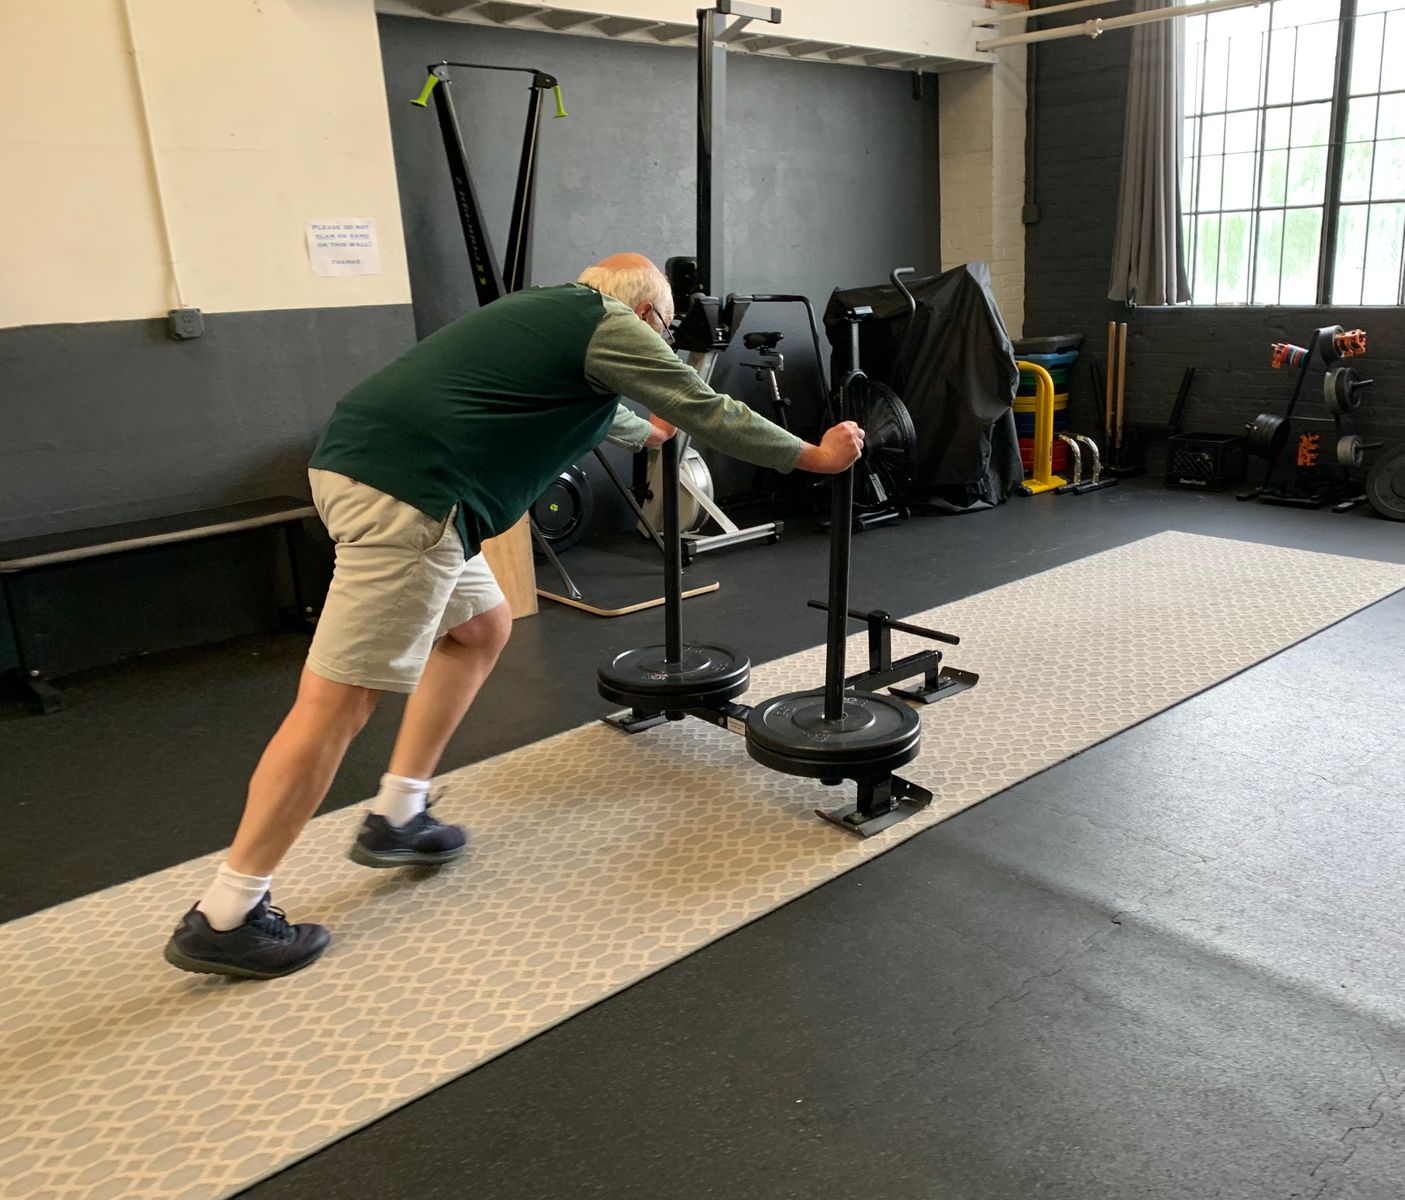 Man pushing weights across the floor